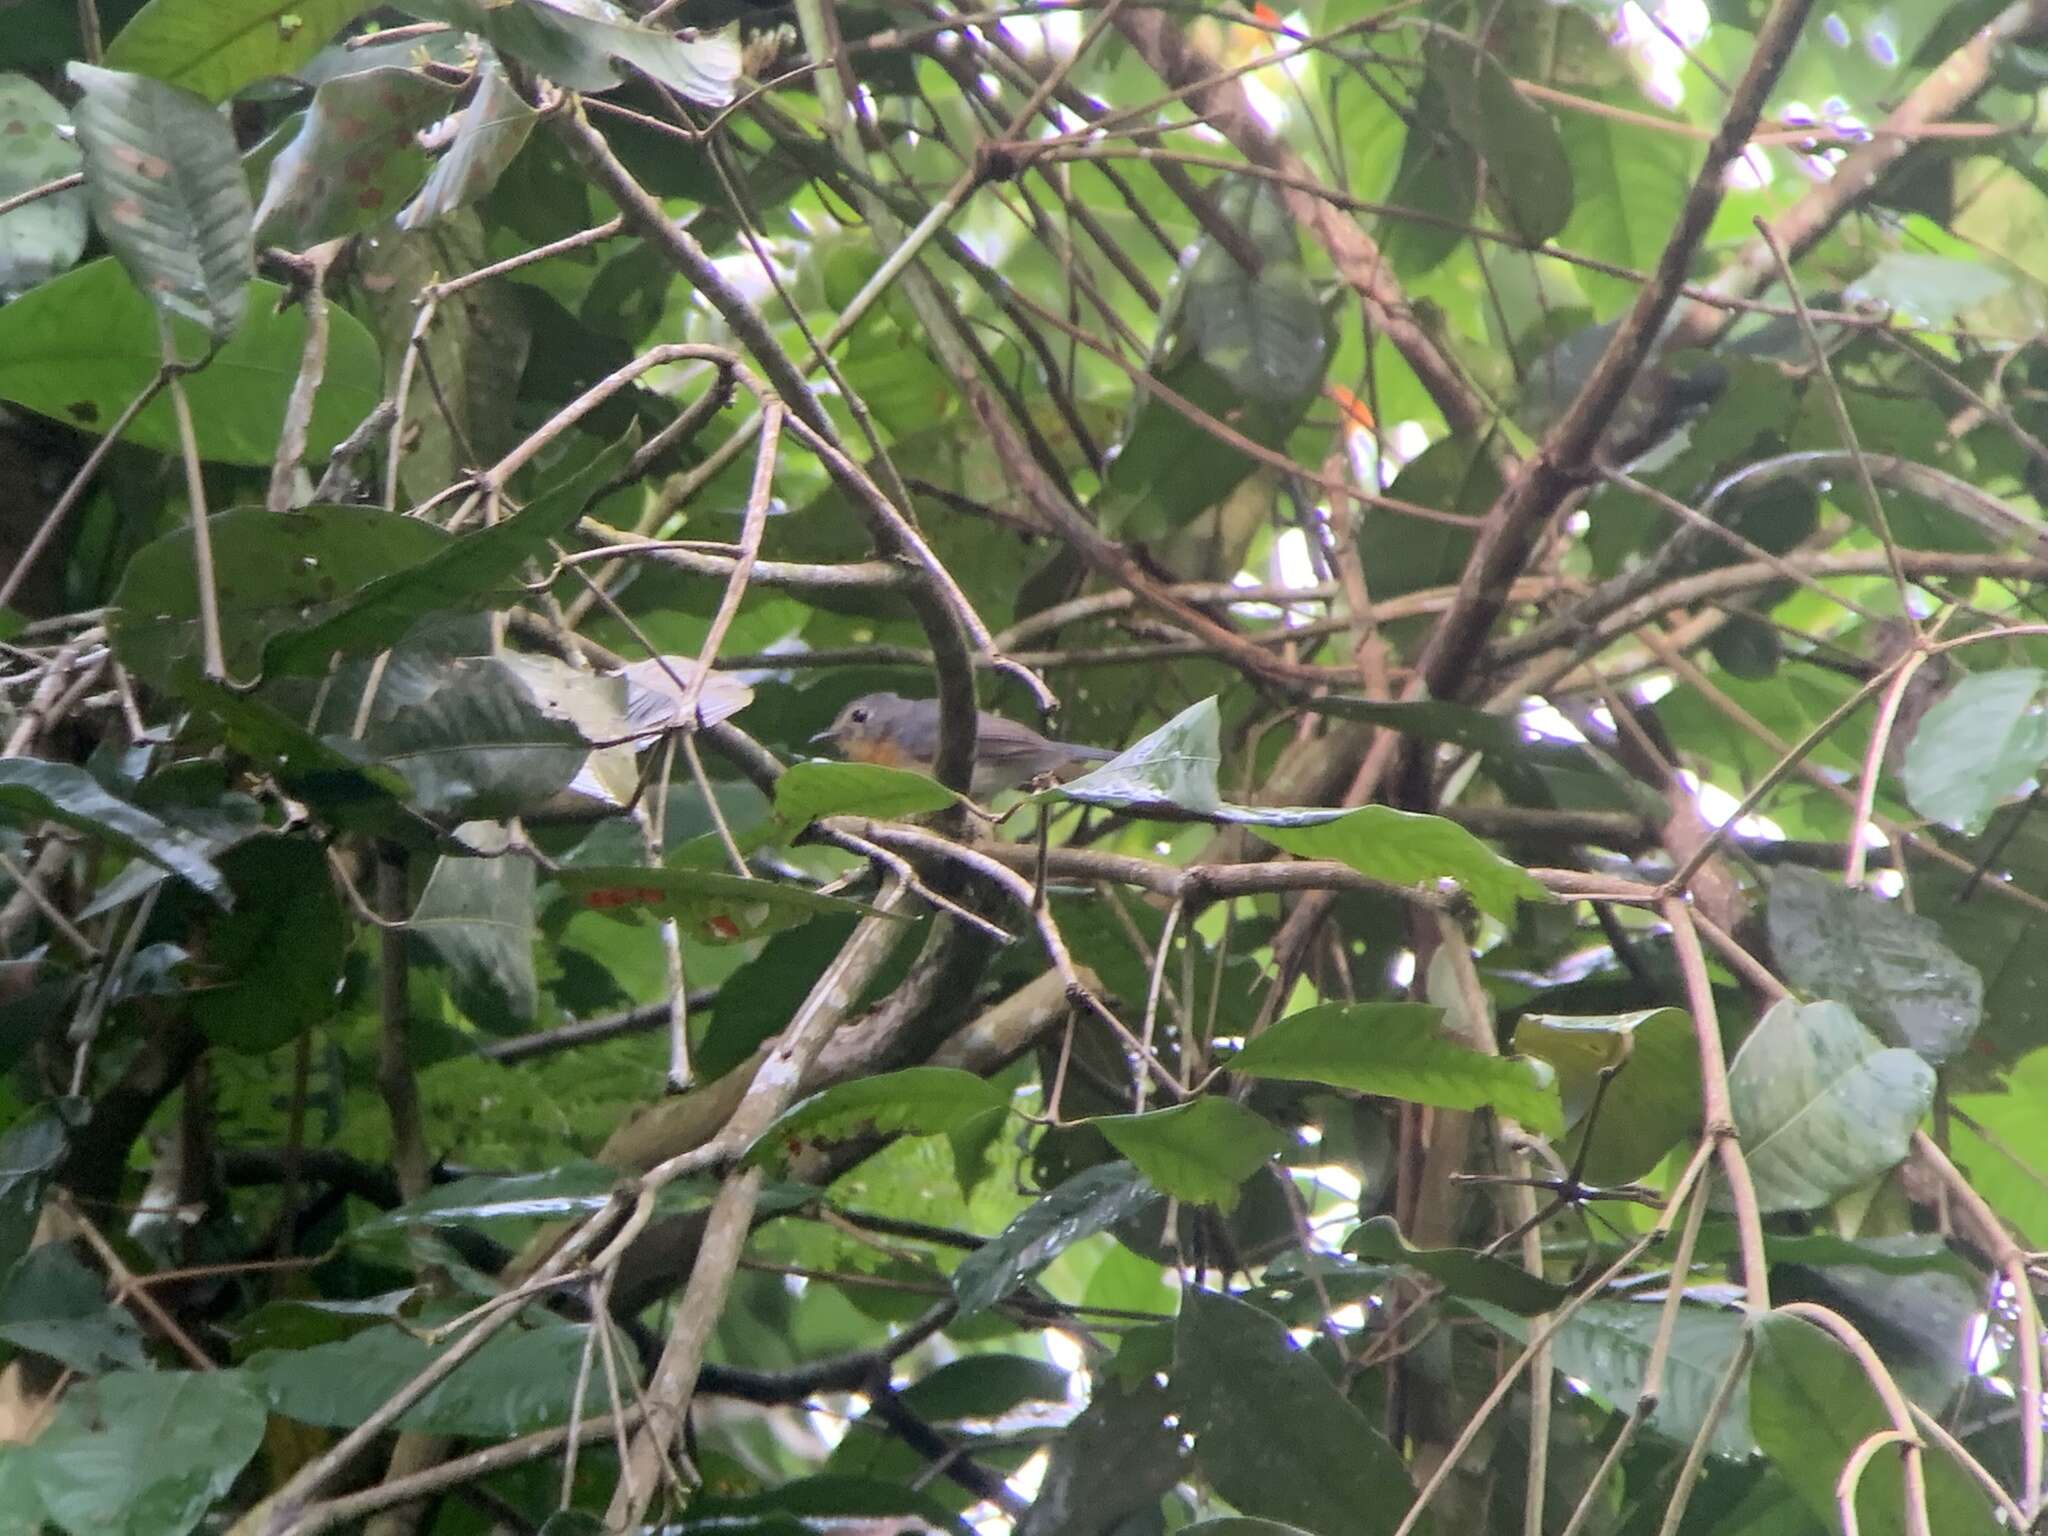 Image of Indochinese Blue Flycatcher